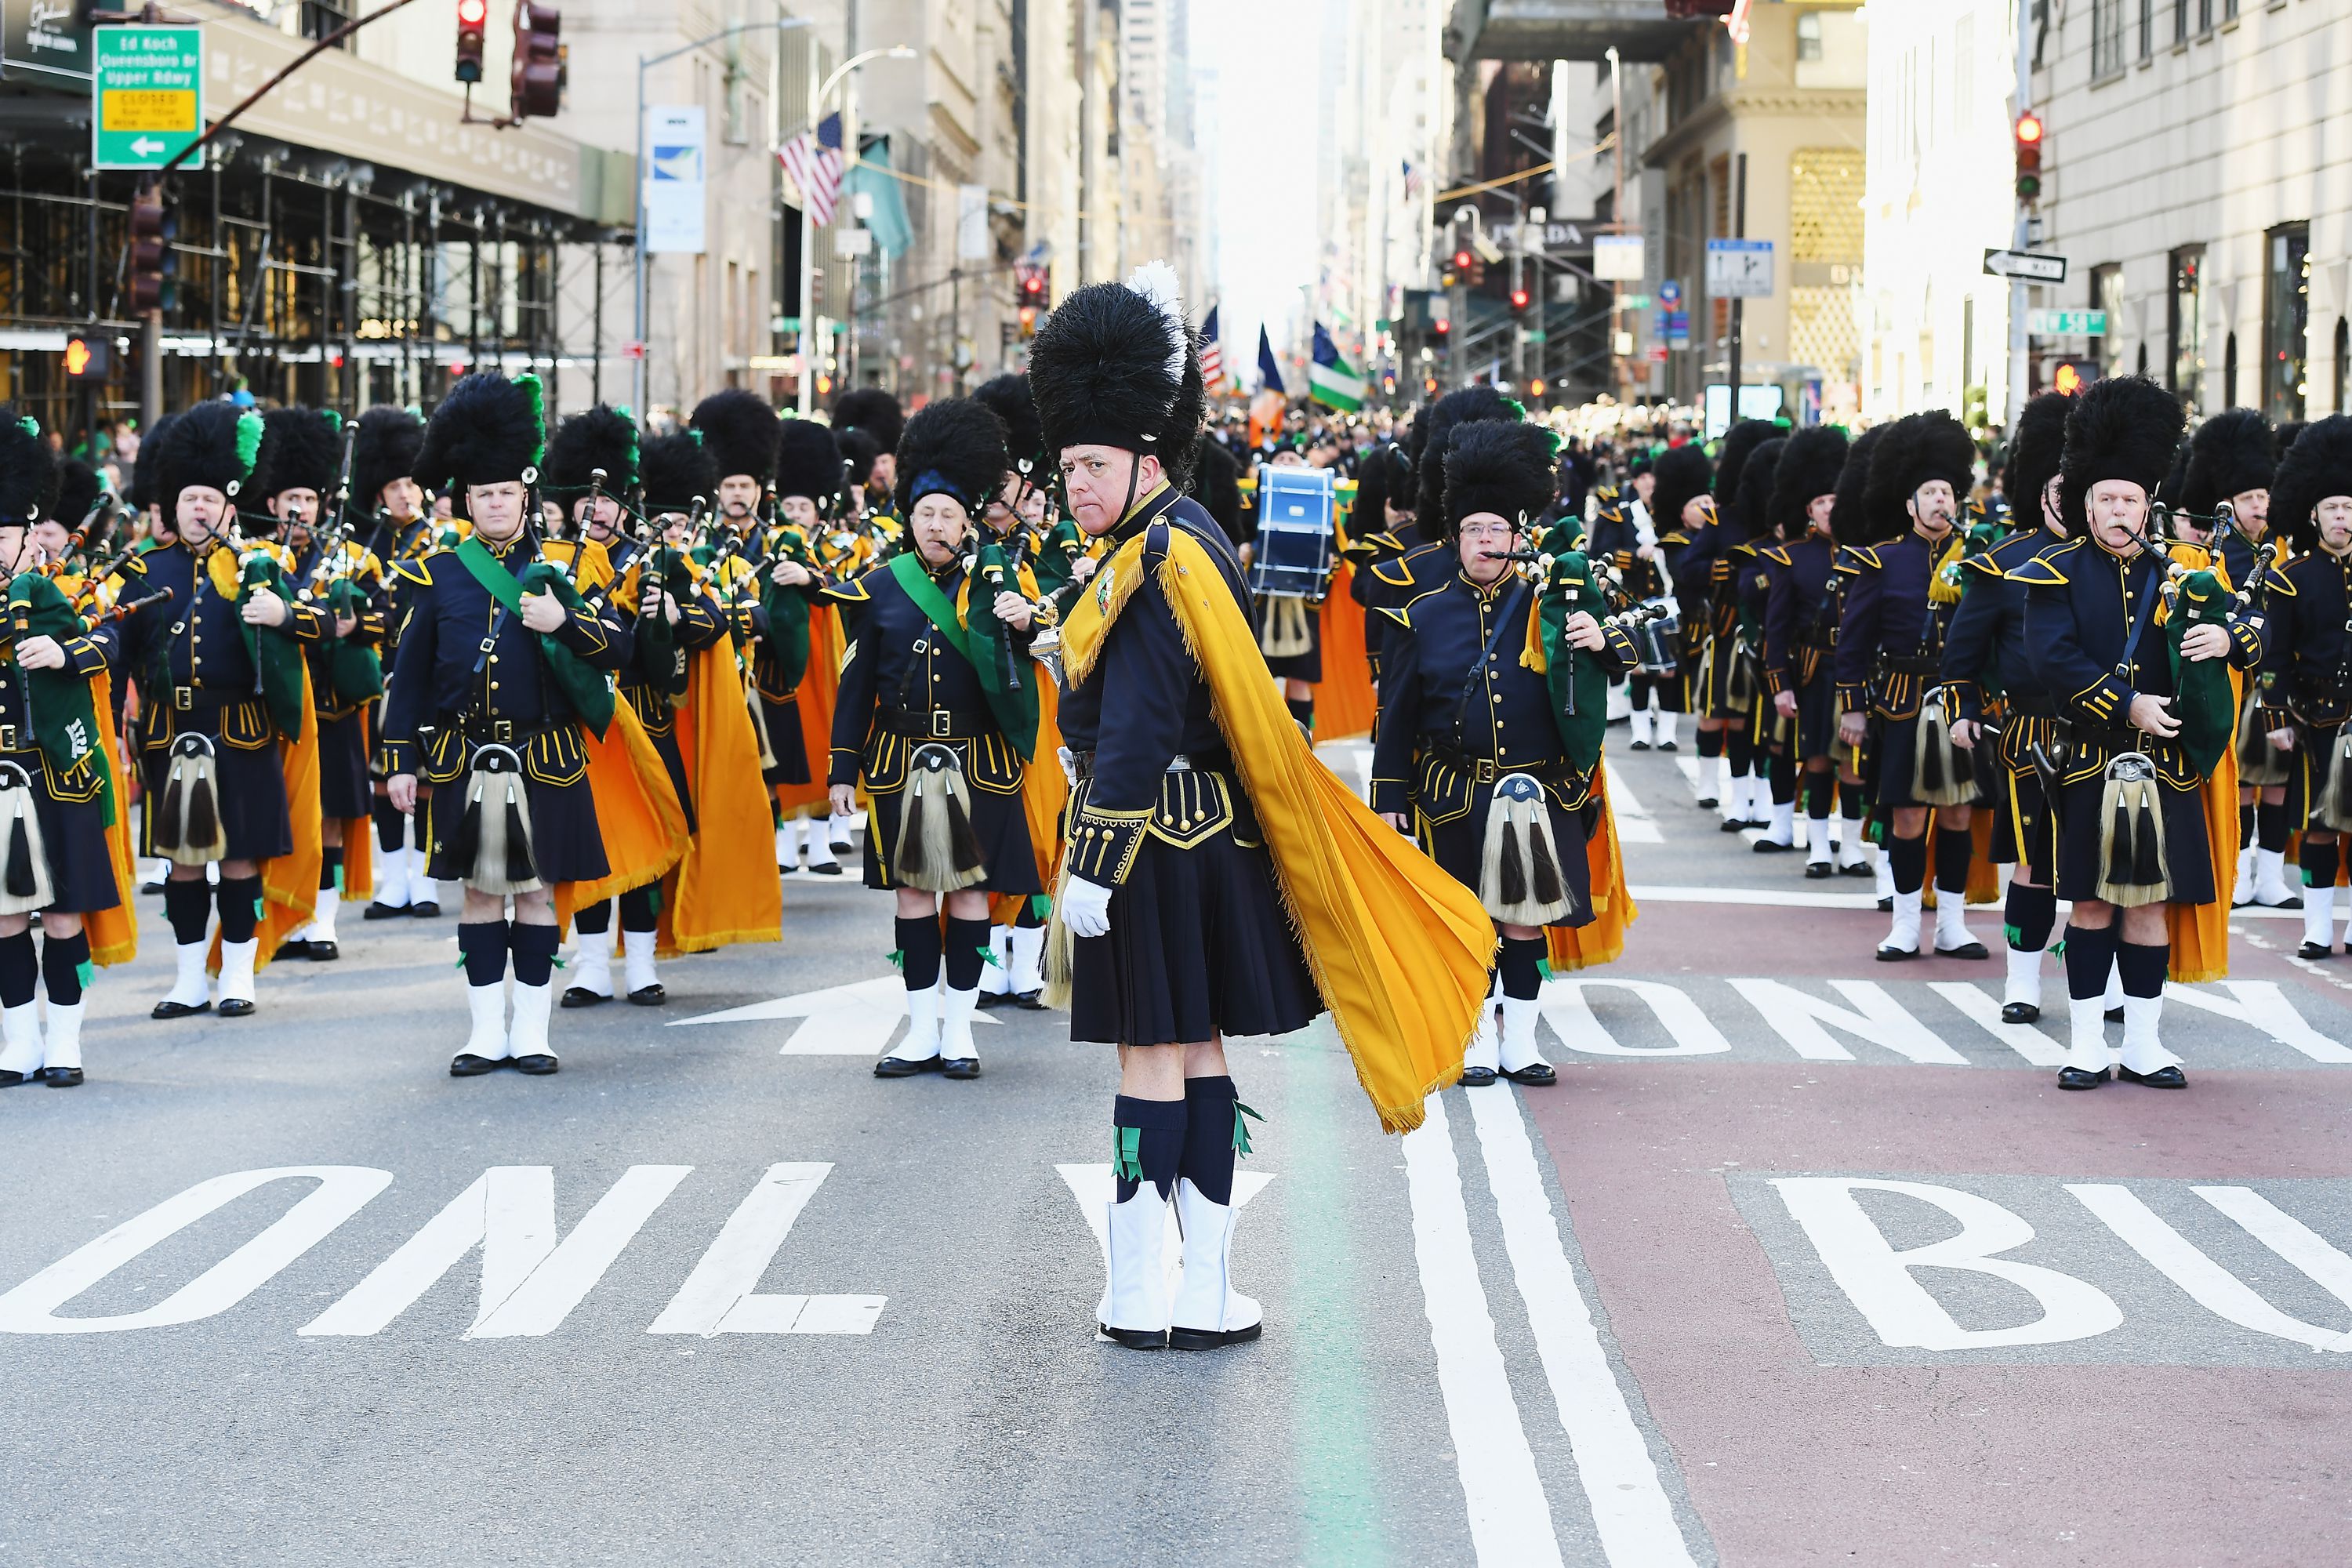 How to Watch the NYC St. Patrick's Day Parade - The New York Times